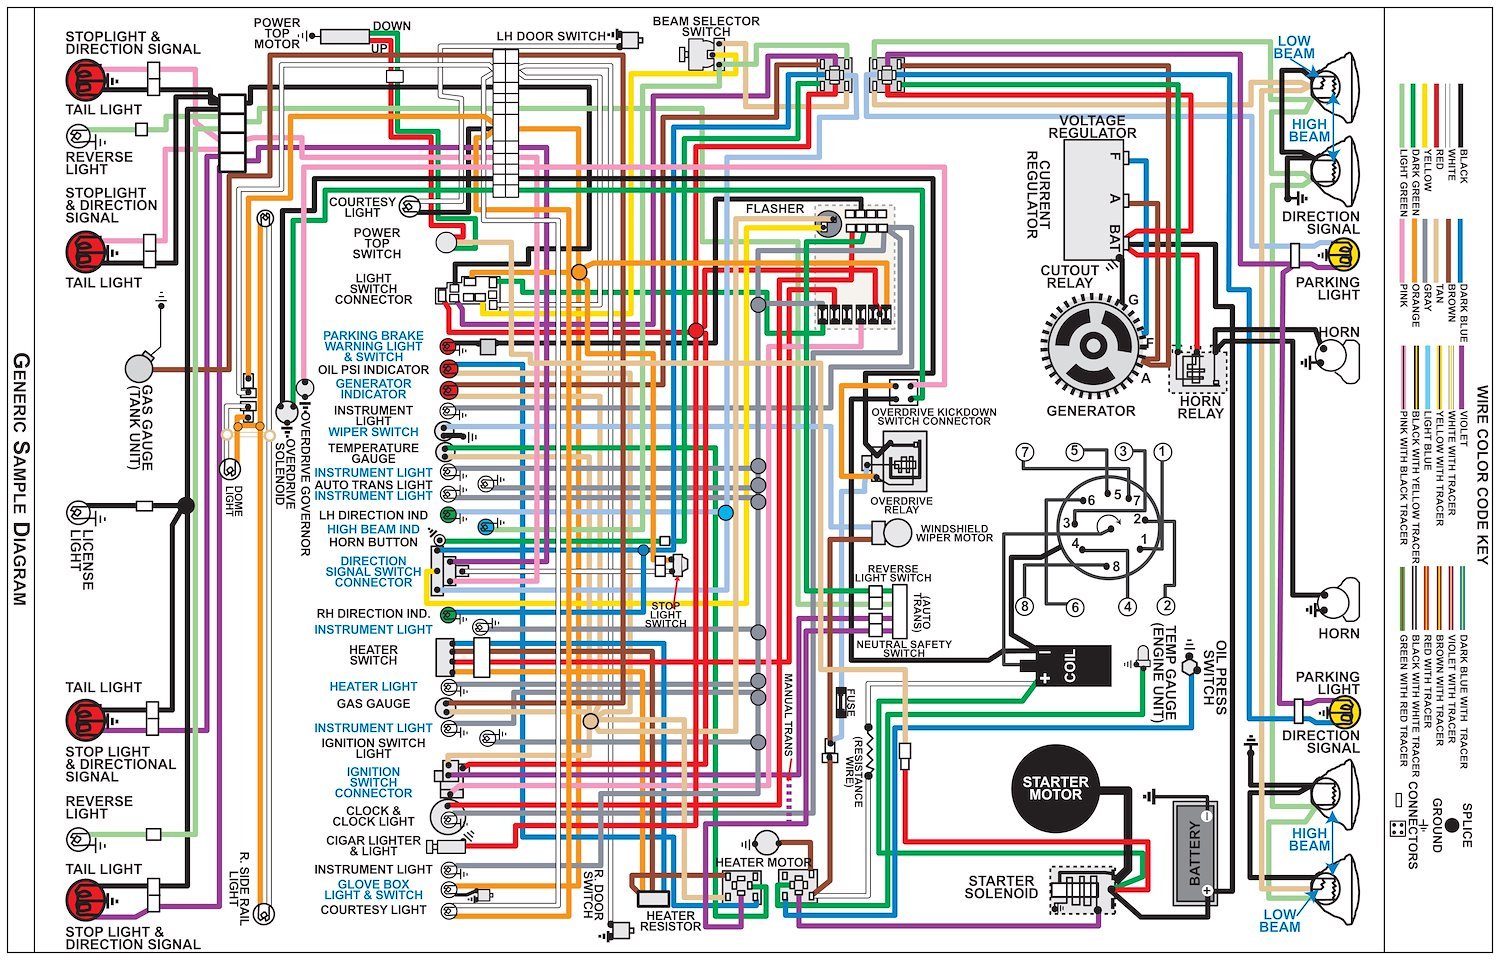 Wiring Diagram for 1961 Chevy Truck, 11 in.